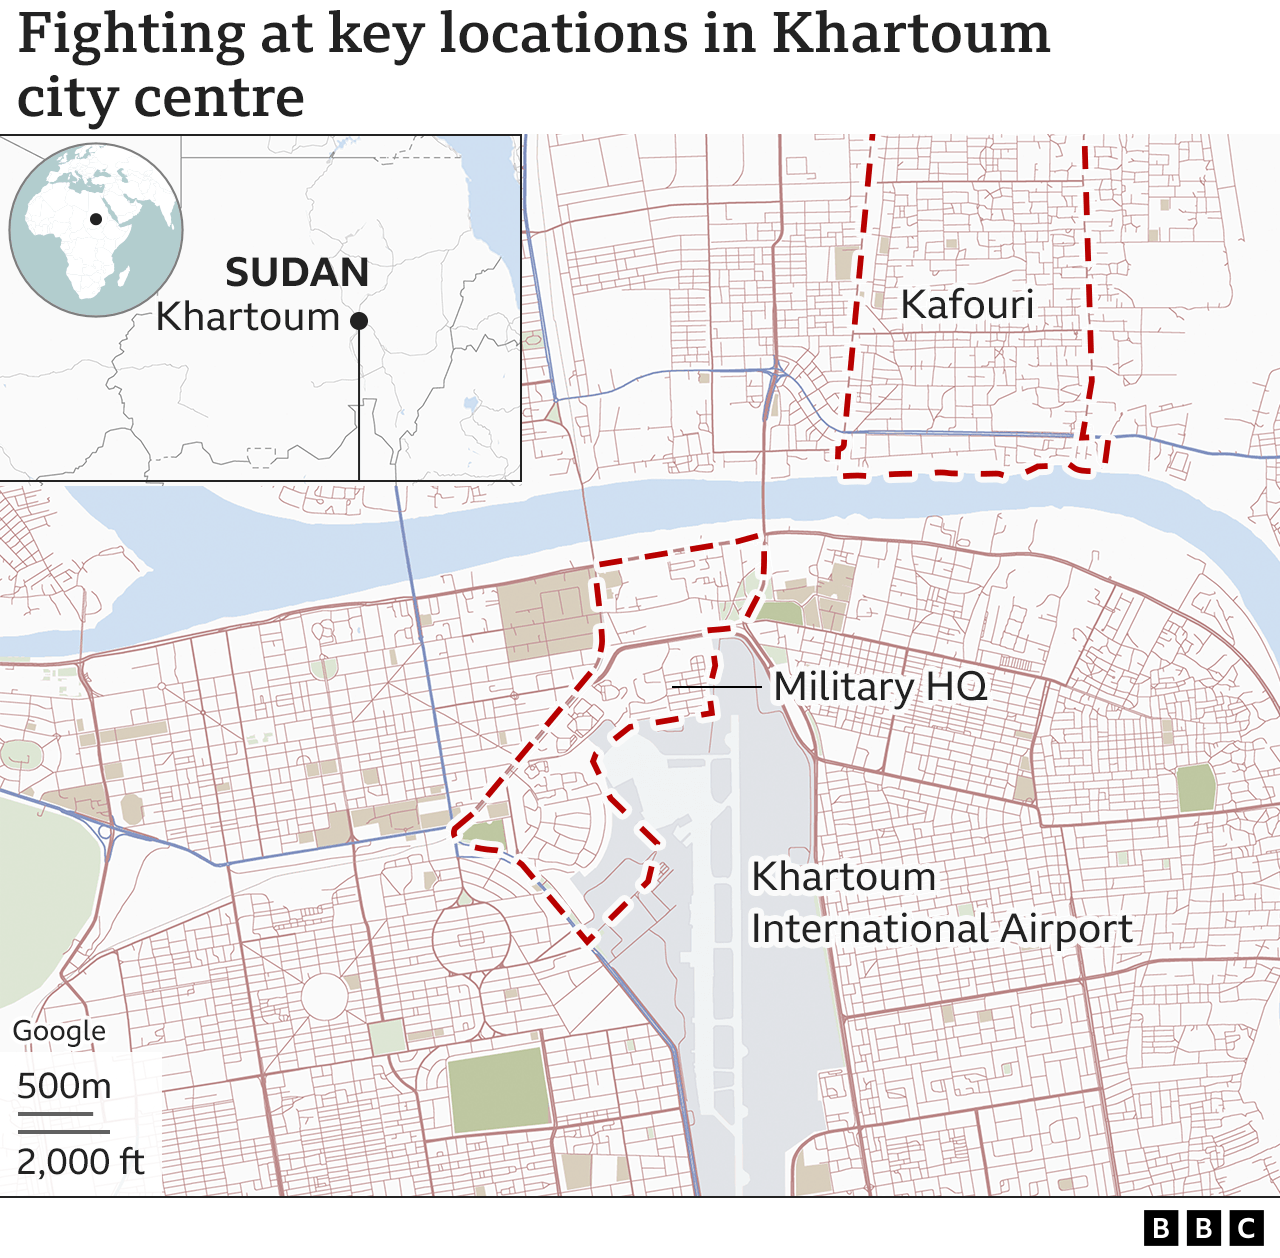 Map showing fighting at key locations in Khartoum city centre